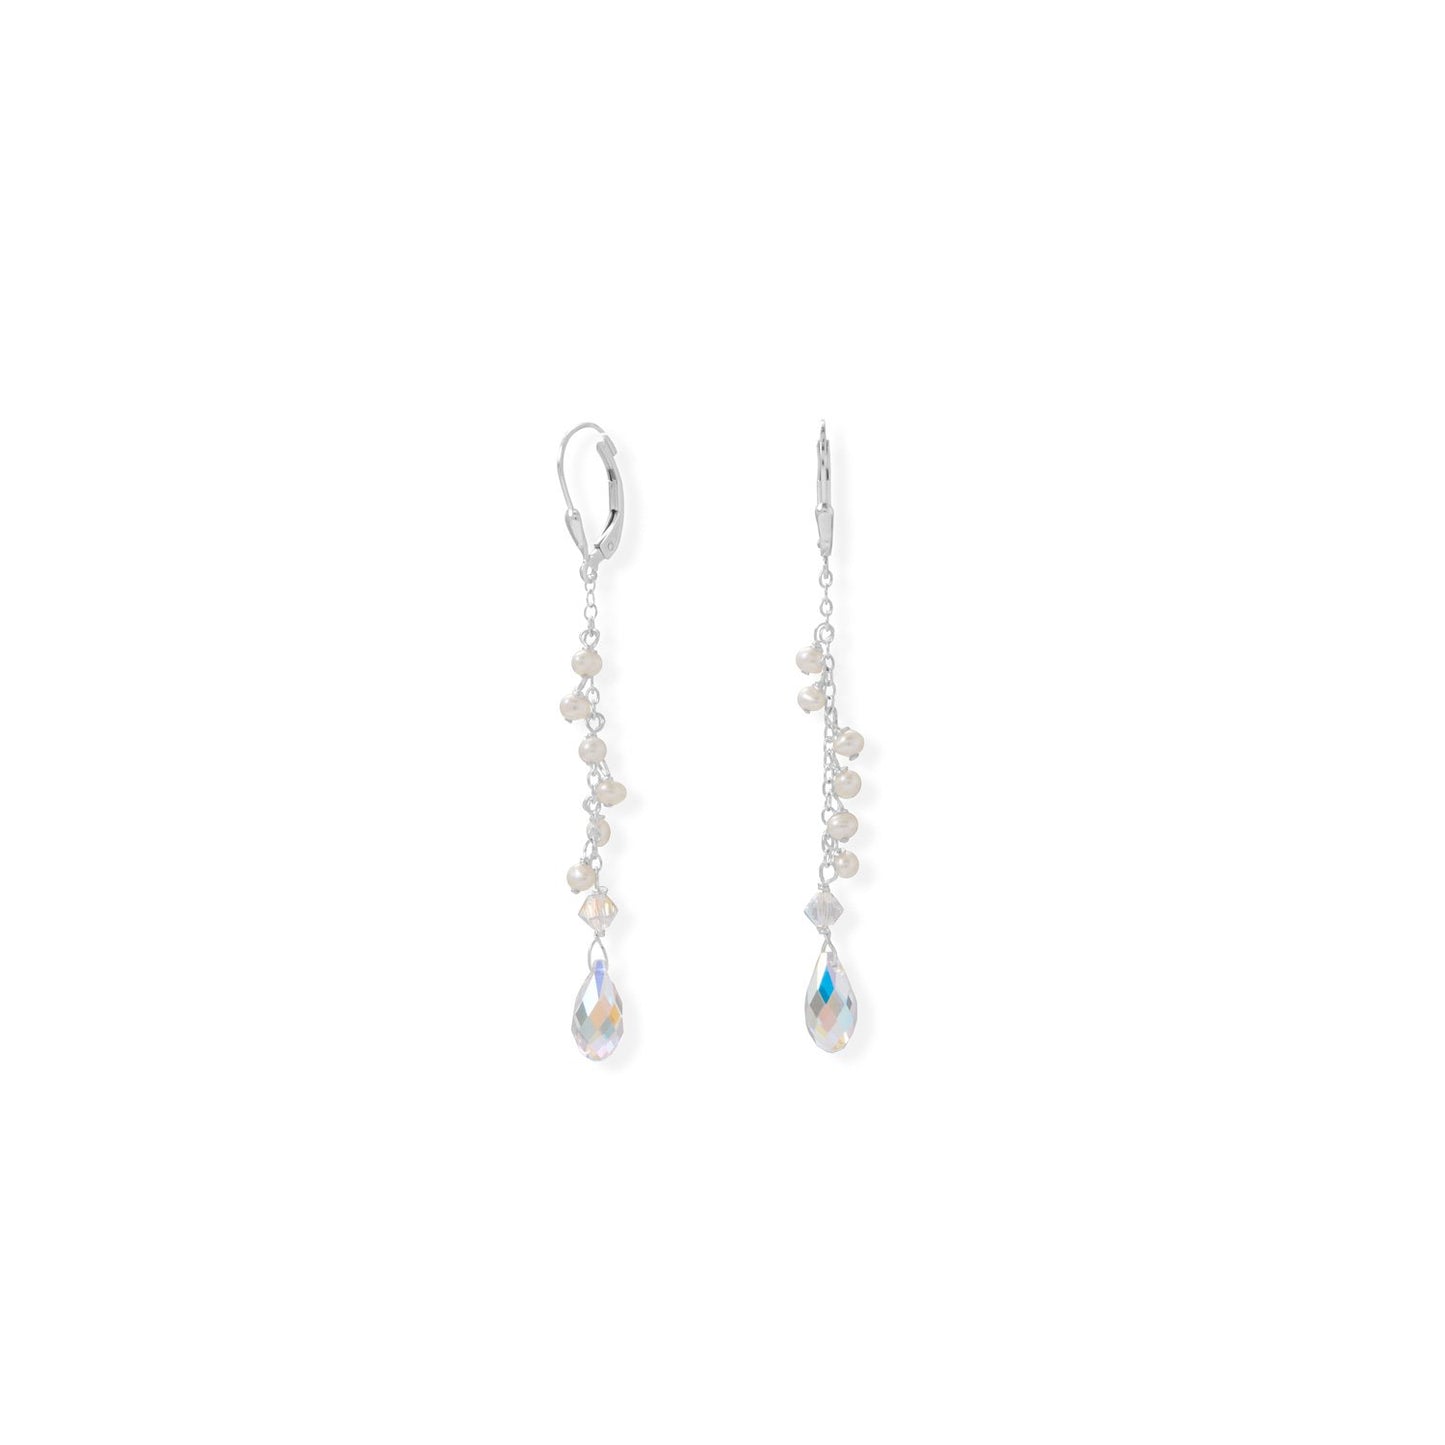 Sterling Silver Swarovski Crystal and Cultured Freshwater Pearl Earrings